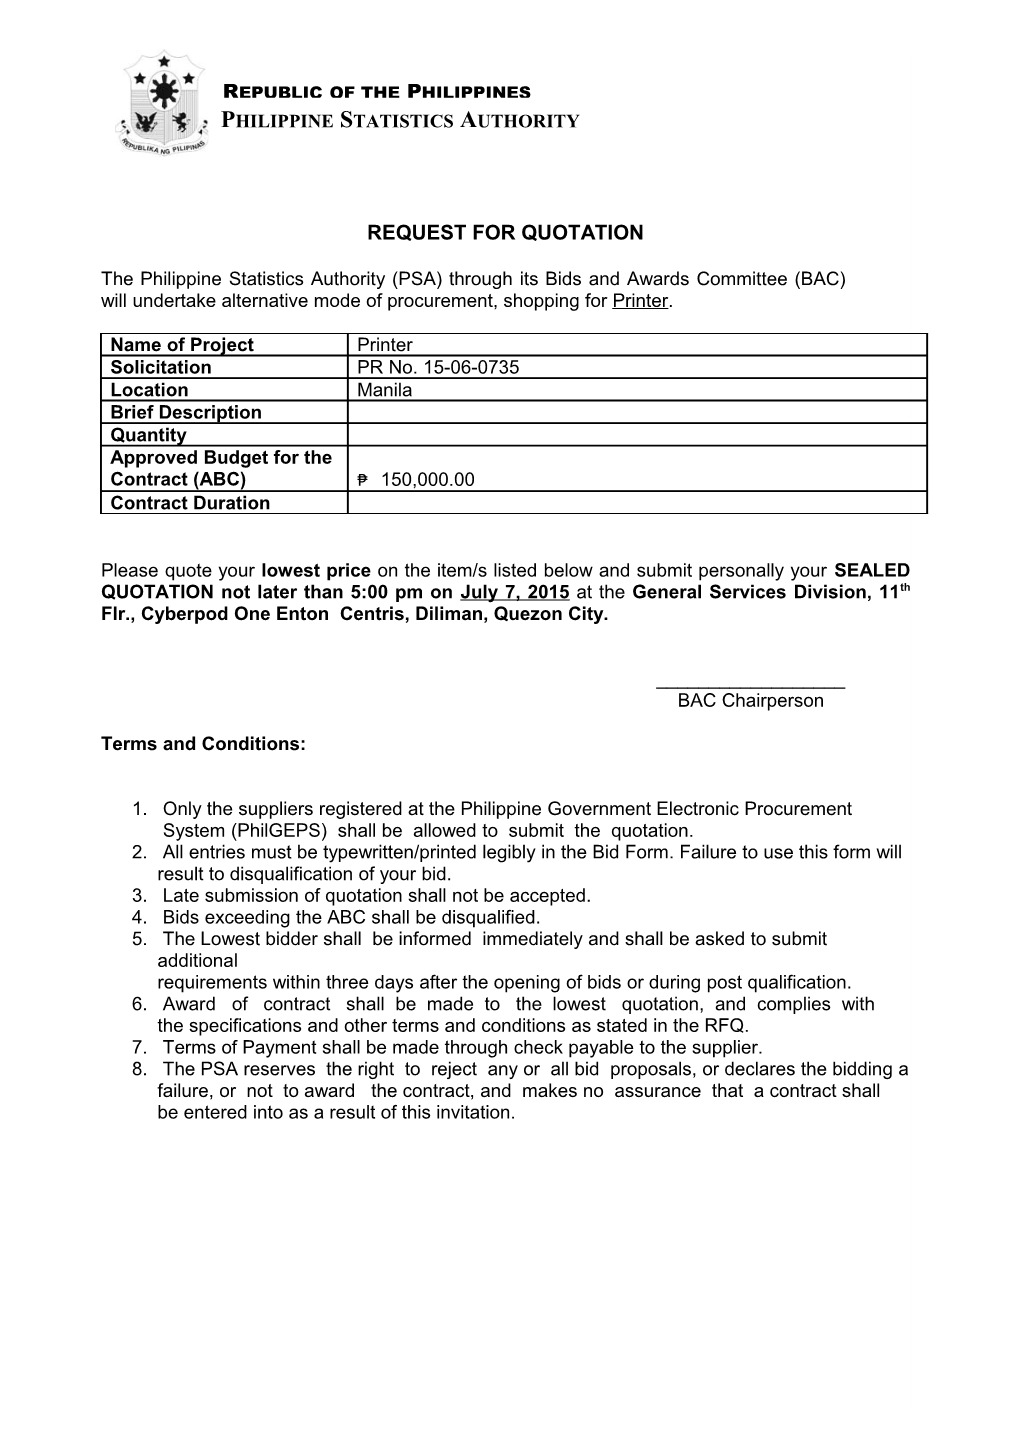 Request for Quotation s32